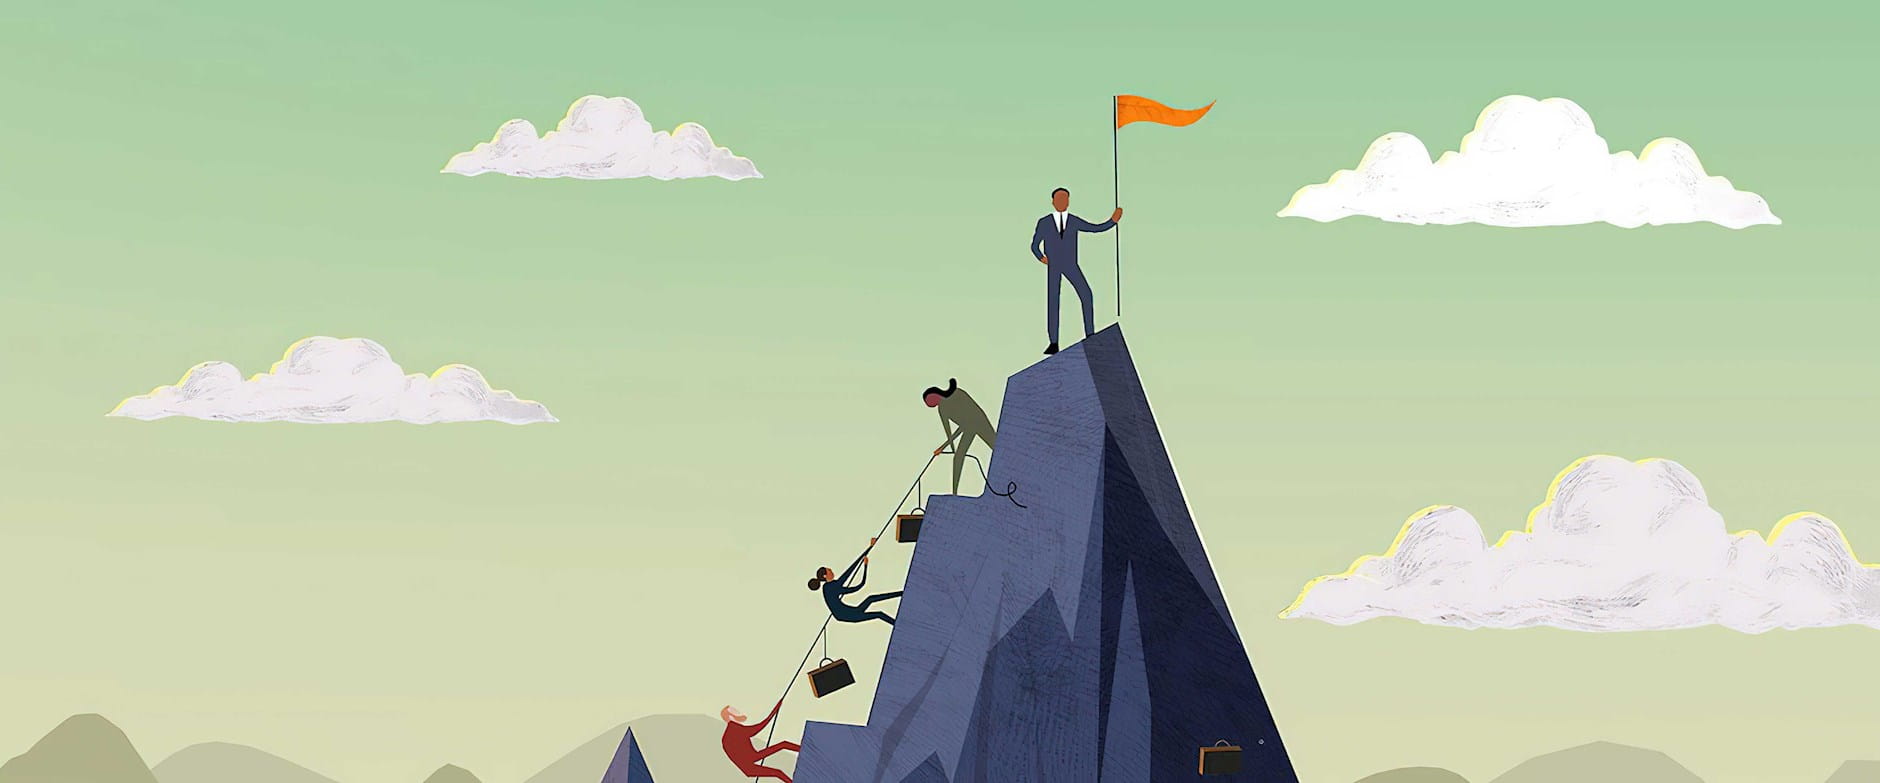 People in business attire climbing a mountain with the first person planting a flag at the top